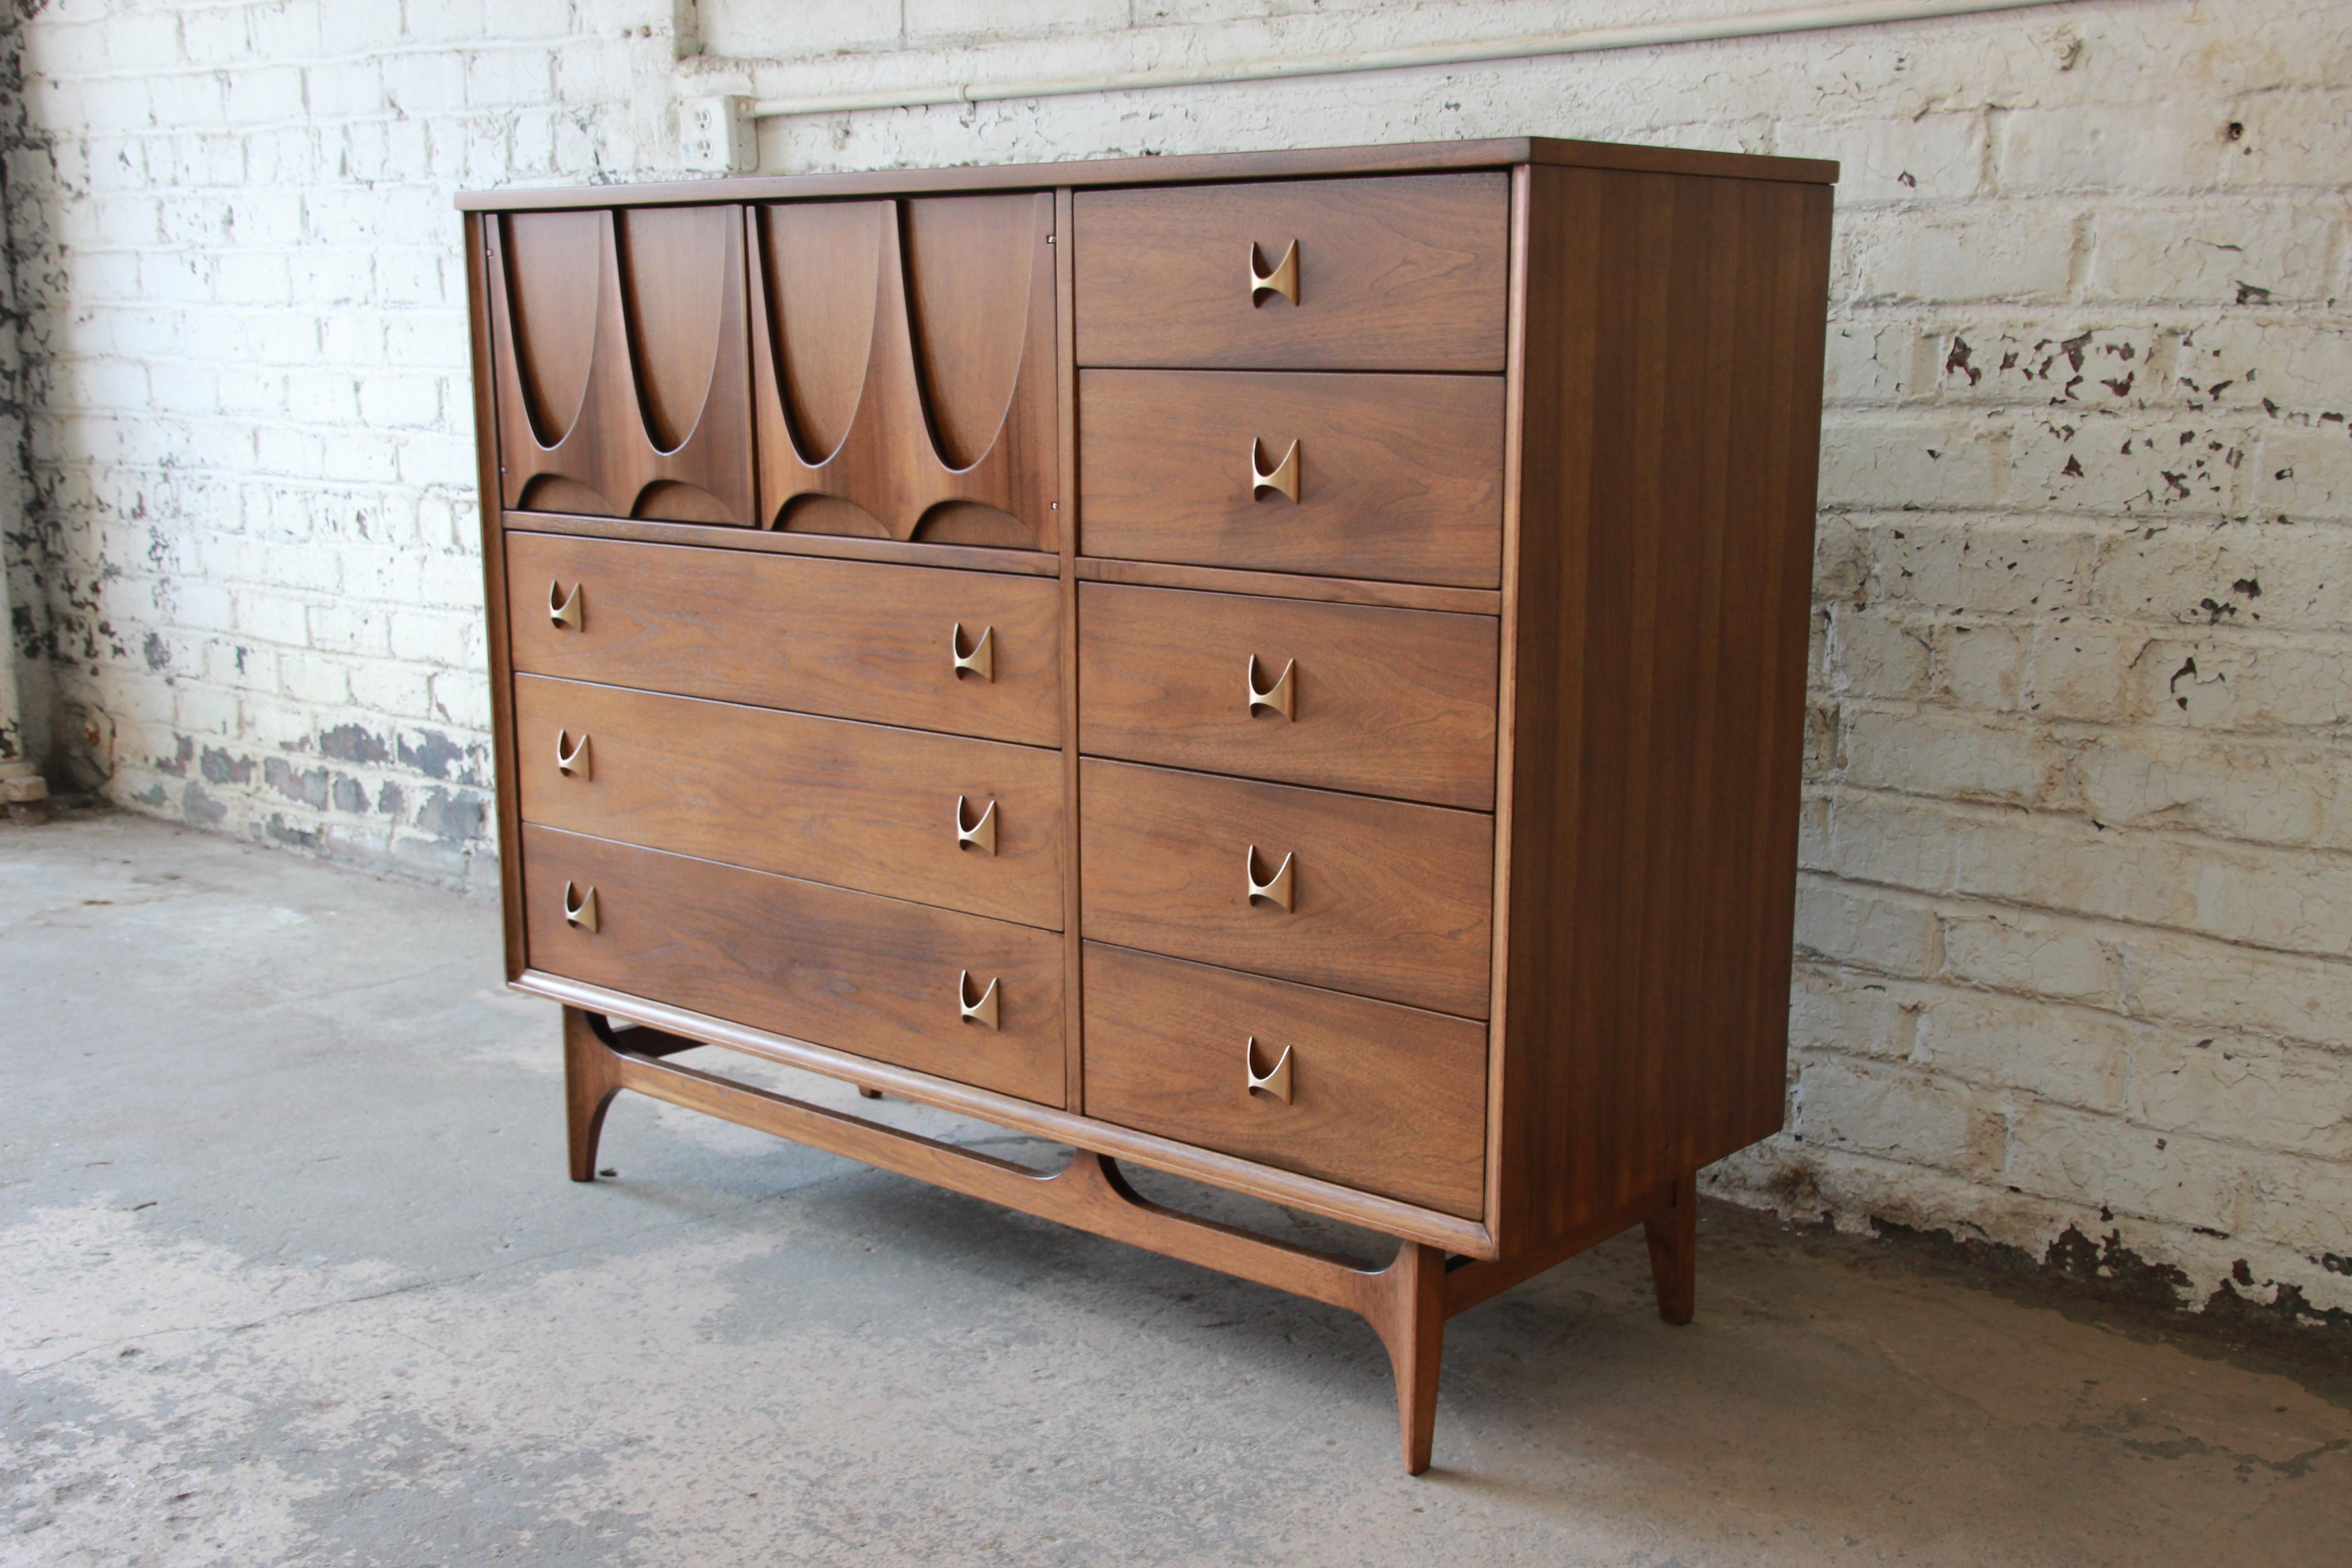 An outstanding Mid-Century Modern sculpted walnut highboy dresser or chest of drawers by Broyhill Brasilia. This is the 